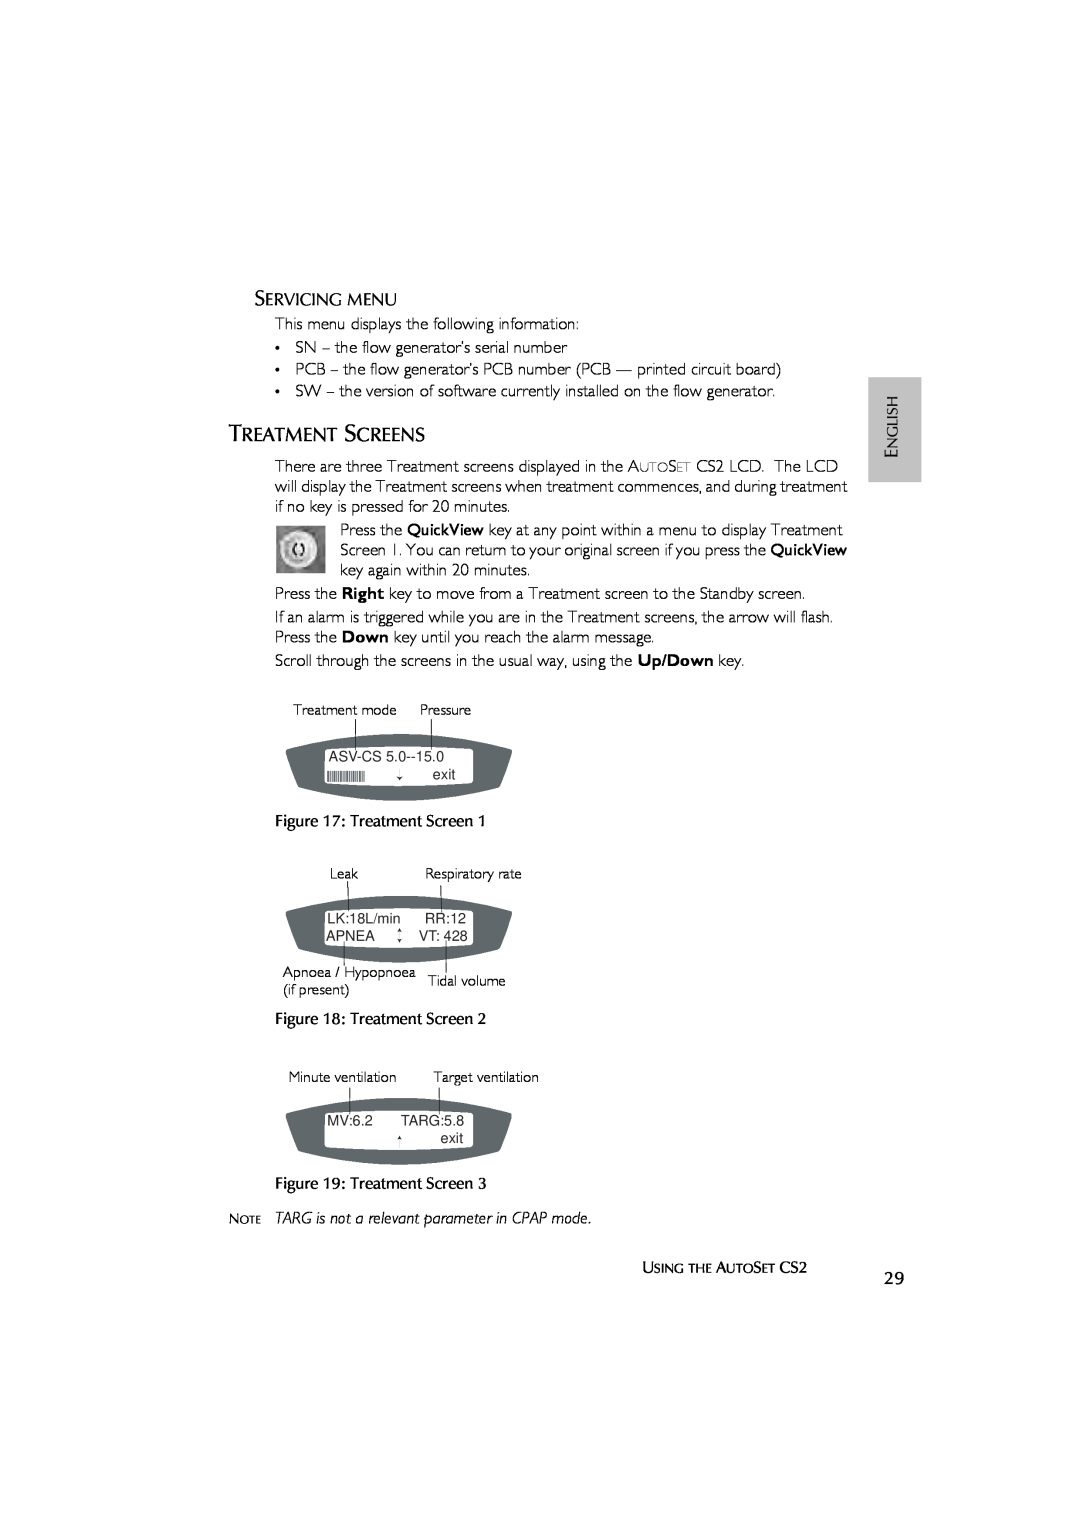 ResMed AutoSet CS 2 user manual Treatment Screens, NOTE TARG is not a relevant parameter in CPAP mode 